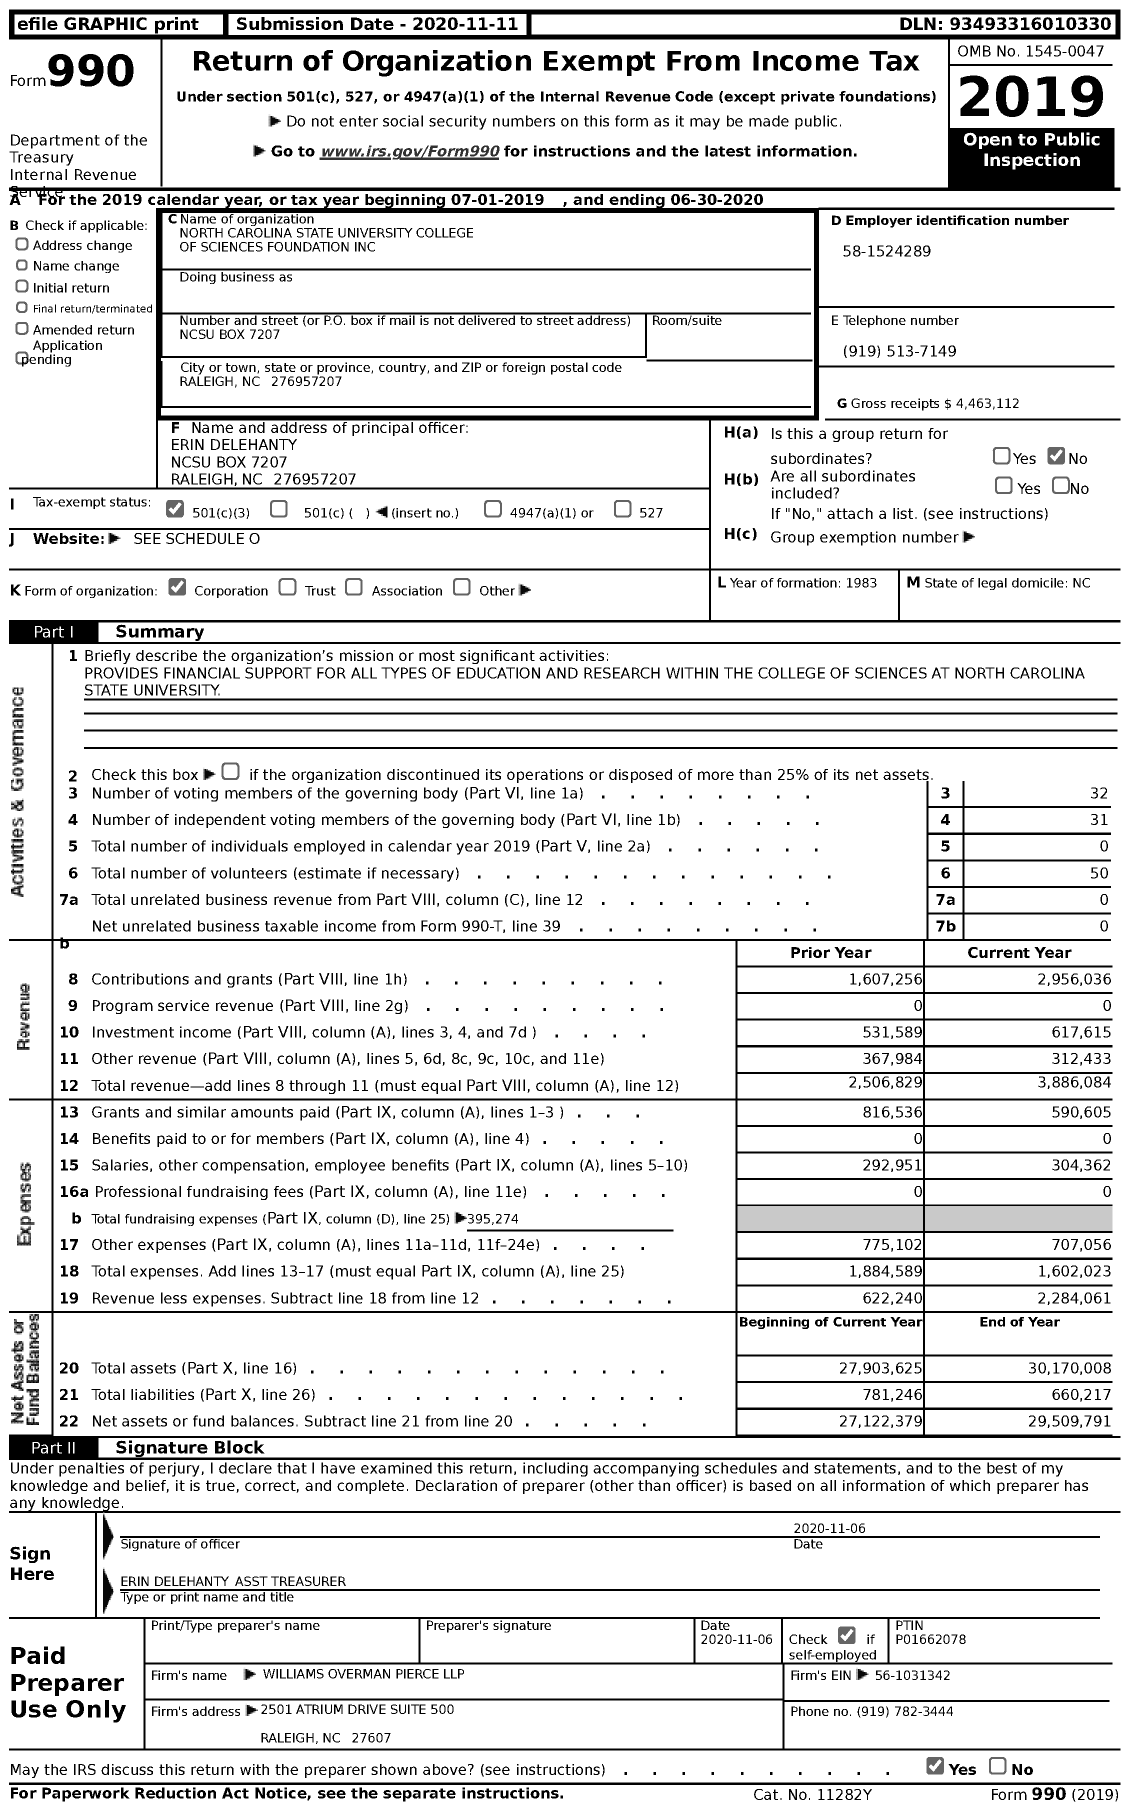 Image of first page of 2019 Form 990 for North Carolina State University College of Sciences Foundation